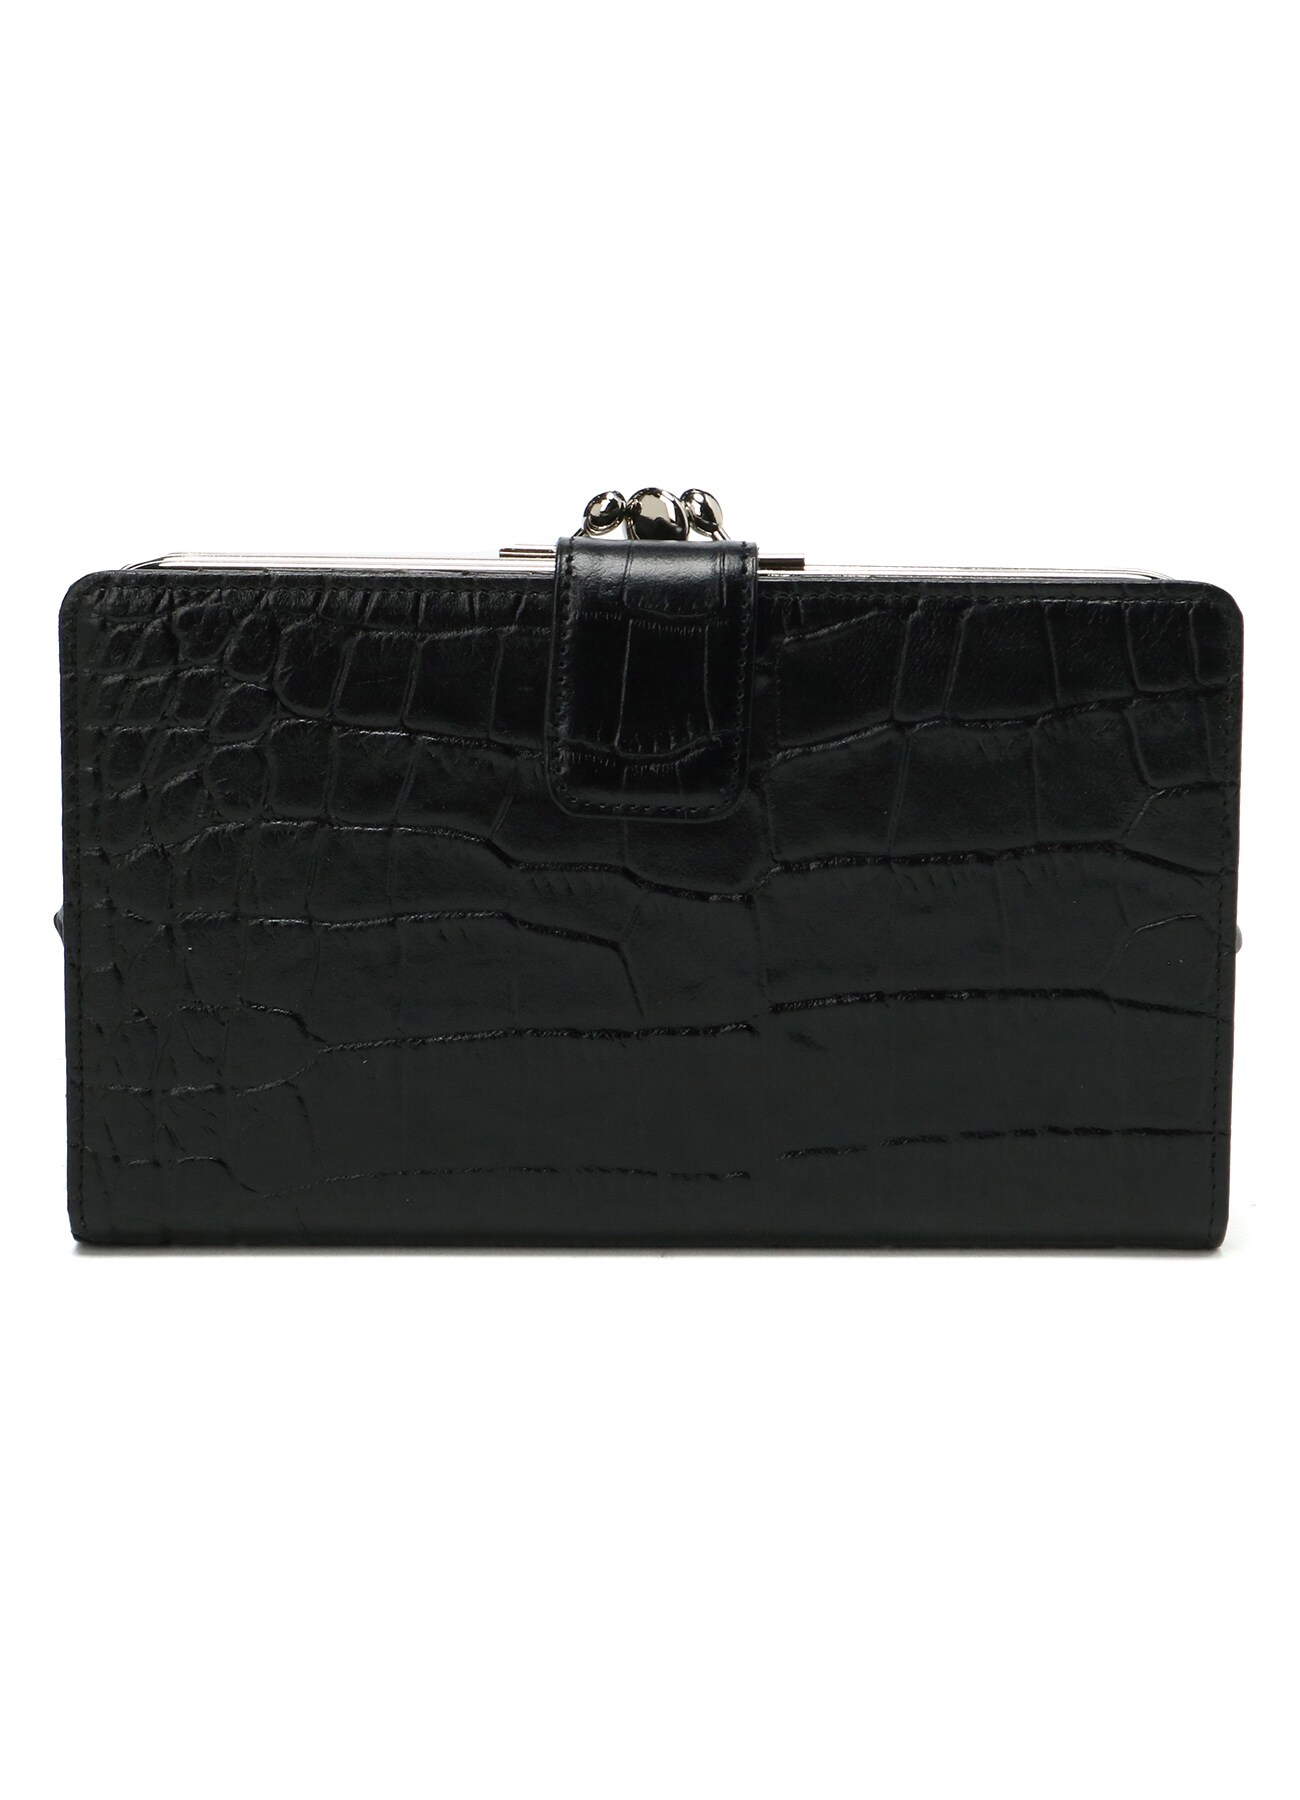 EMBOSSED CROCODILE LEATHER LONG CLASP WALLET